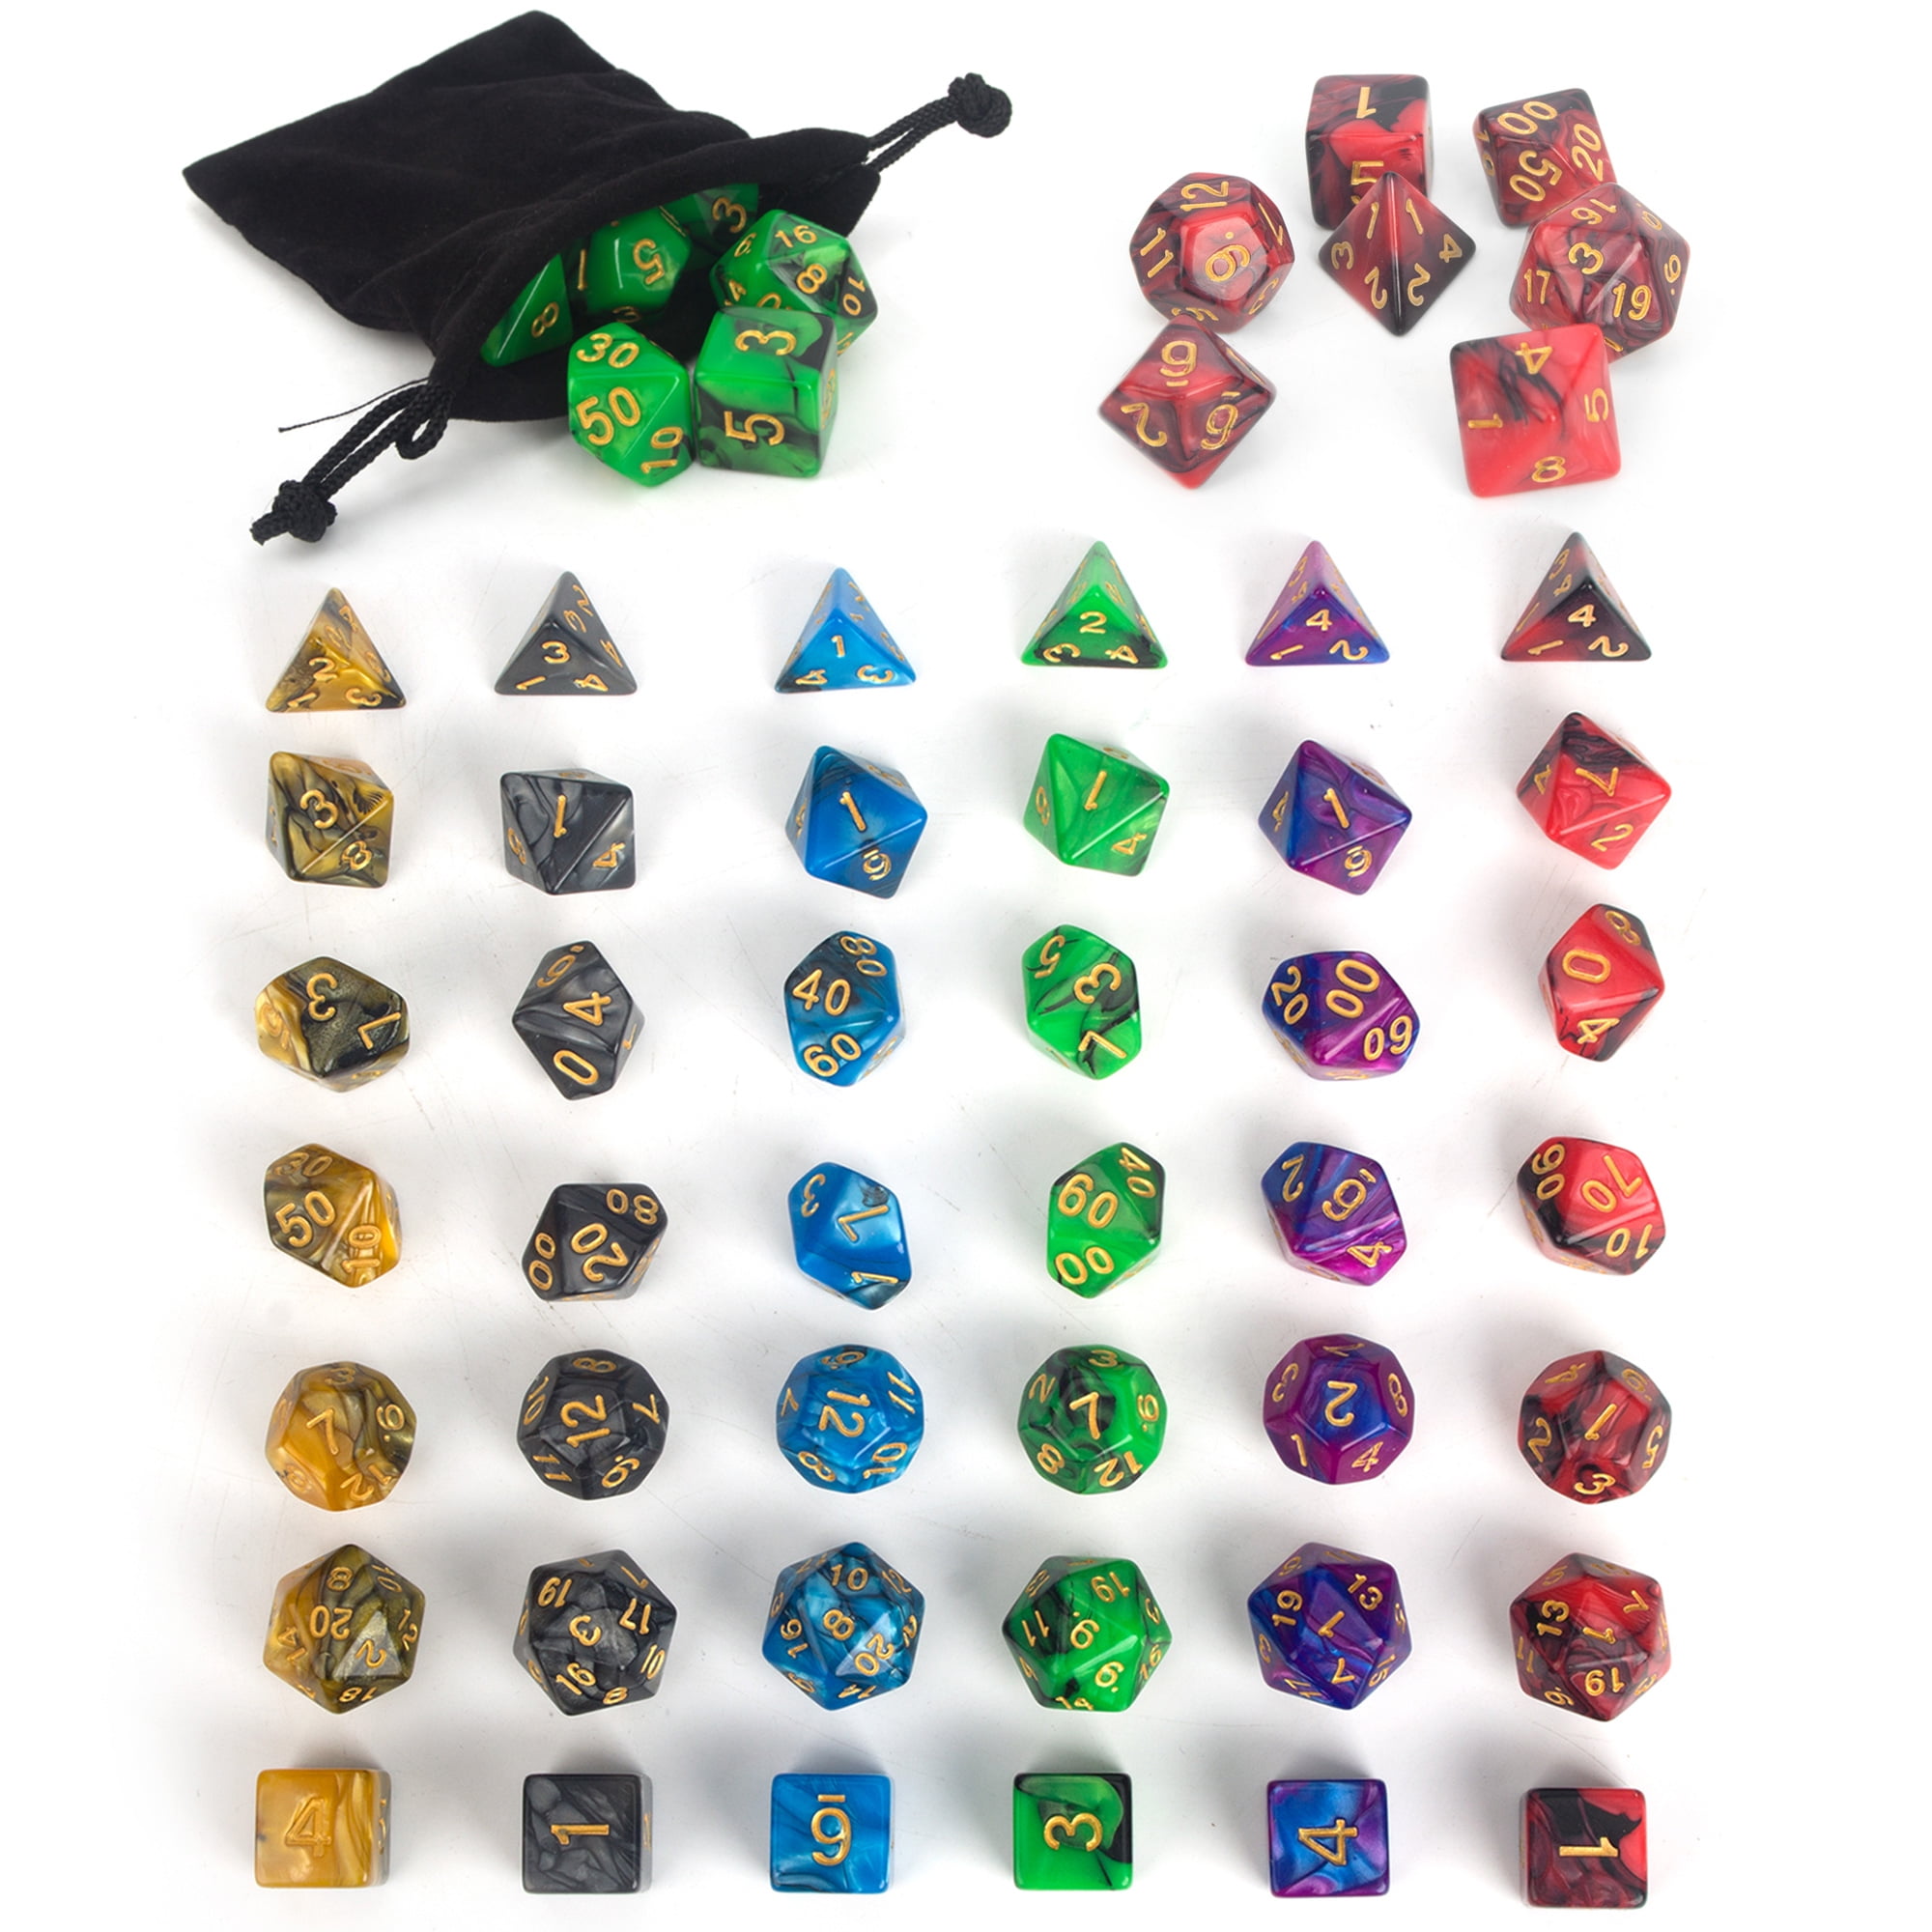 HS 6 Sets Dice Dungeons and Dragons Dice Set 7 Sided Polyhedral DND DD RPG MTG 